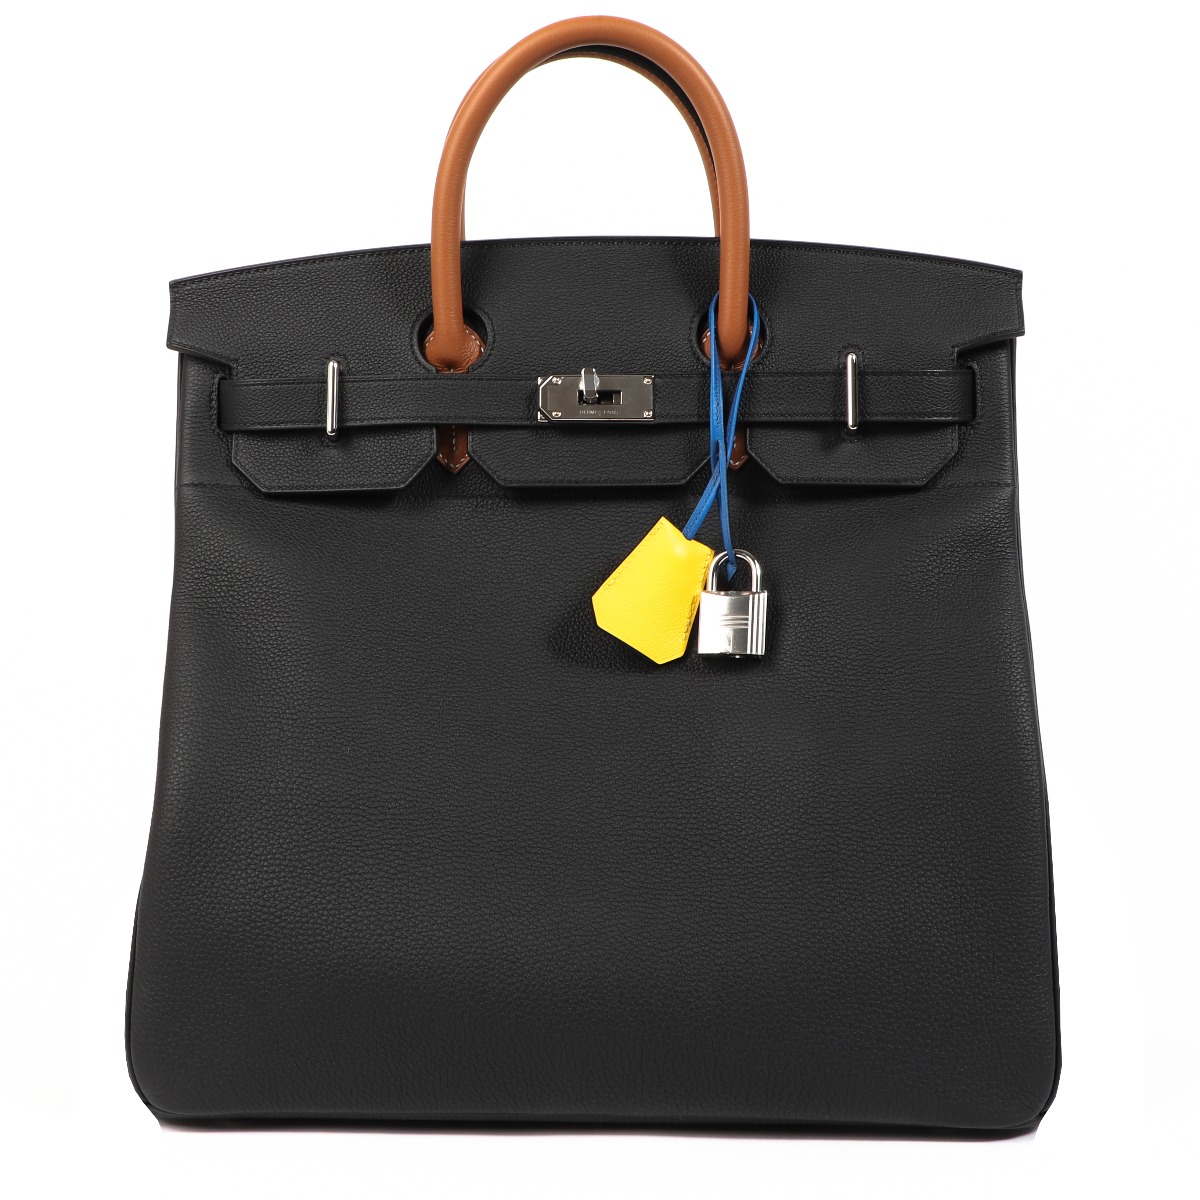 Limited Edition Hermès Birkin 40 HAC (Haut a Courroies) Cosmo